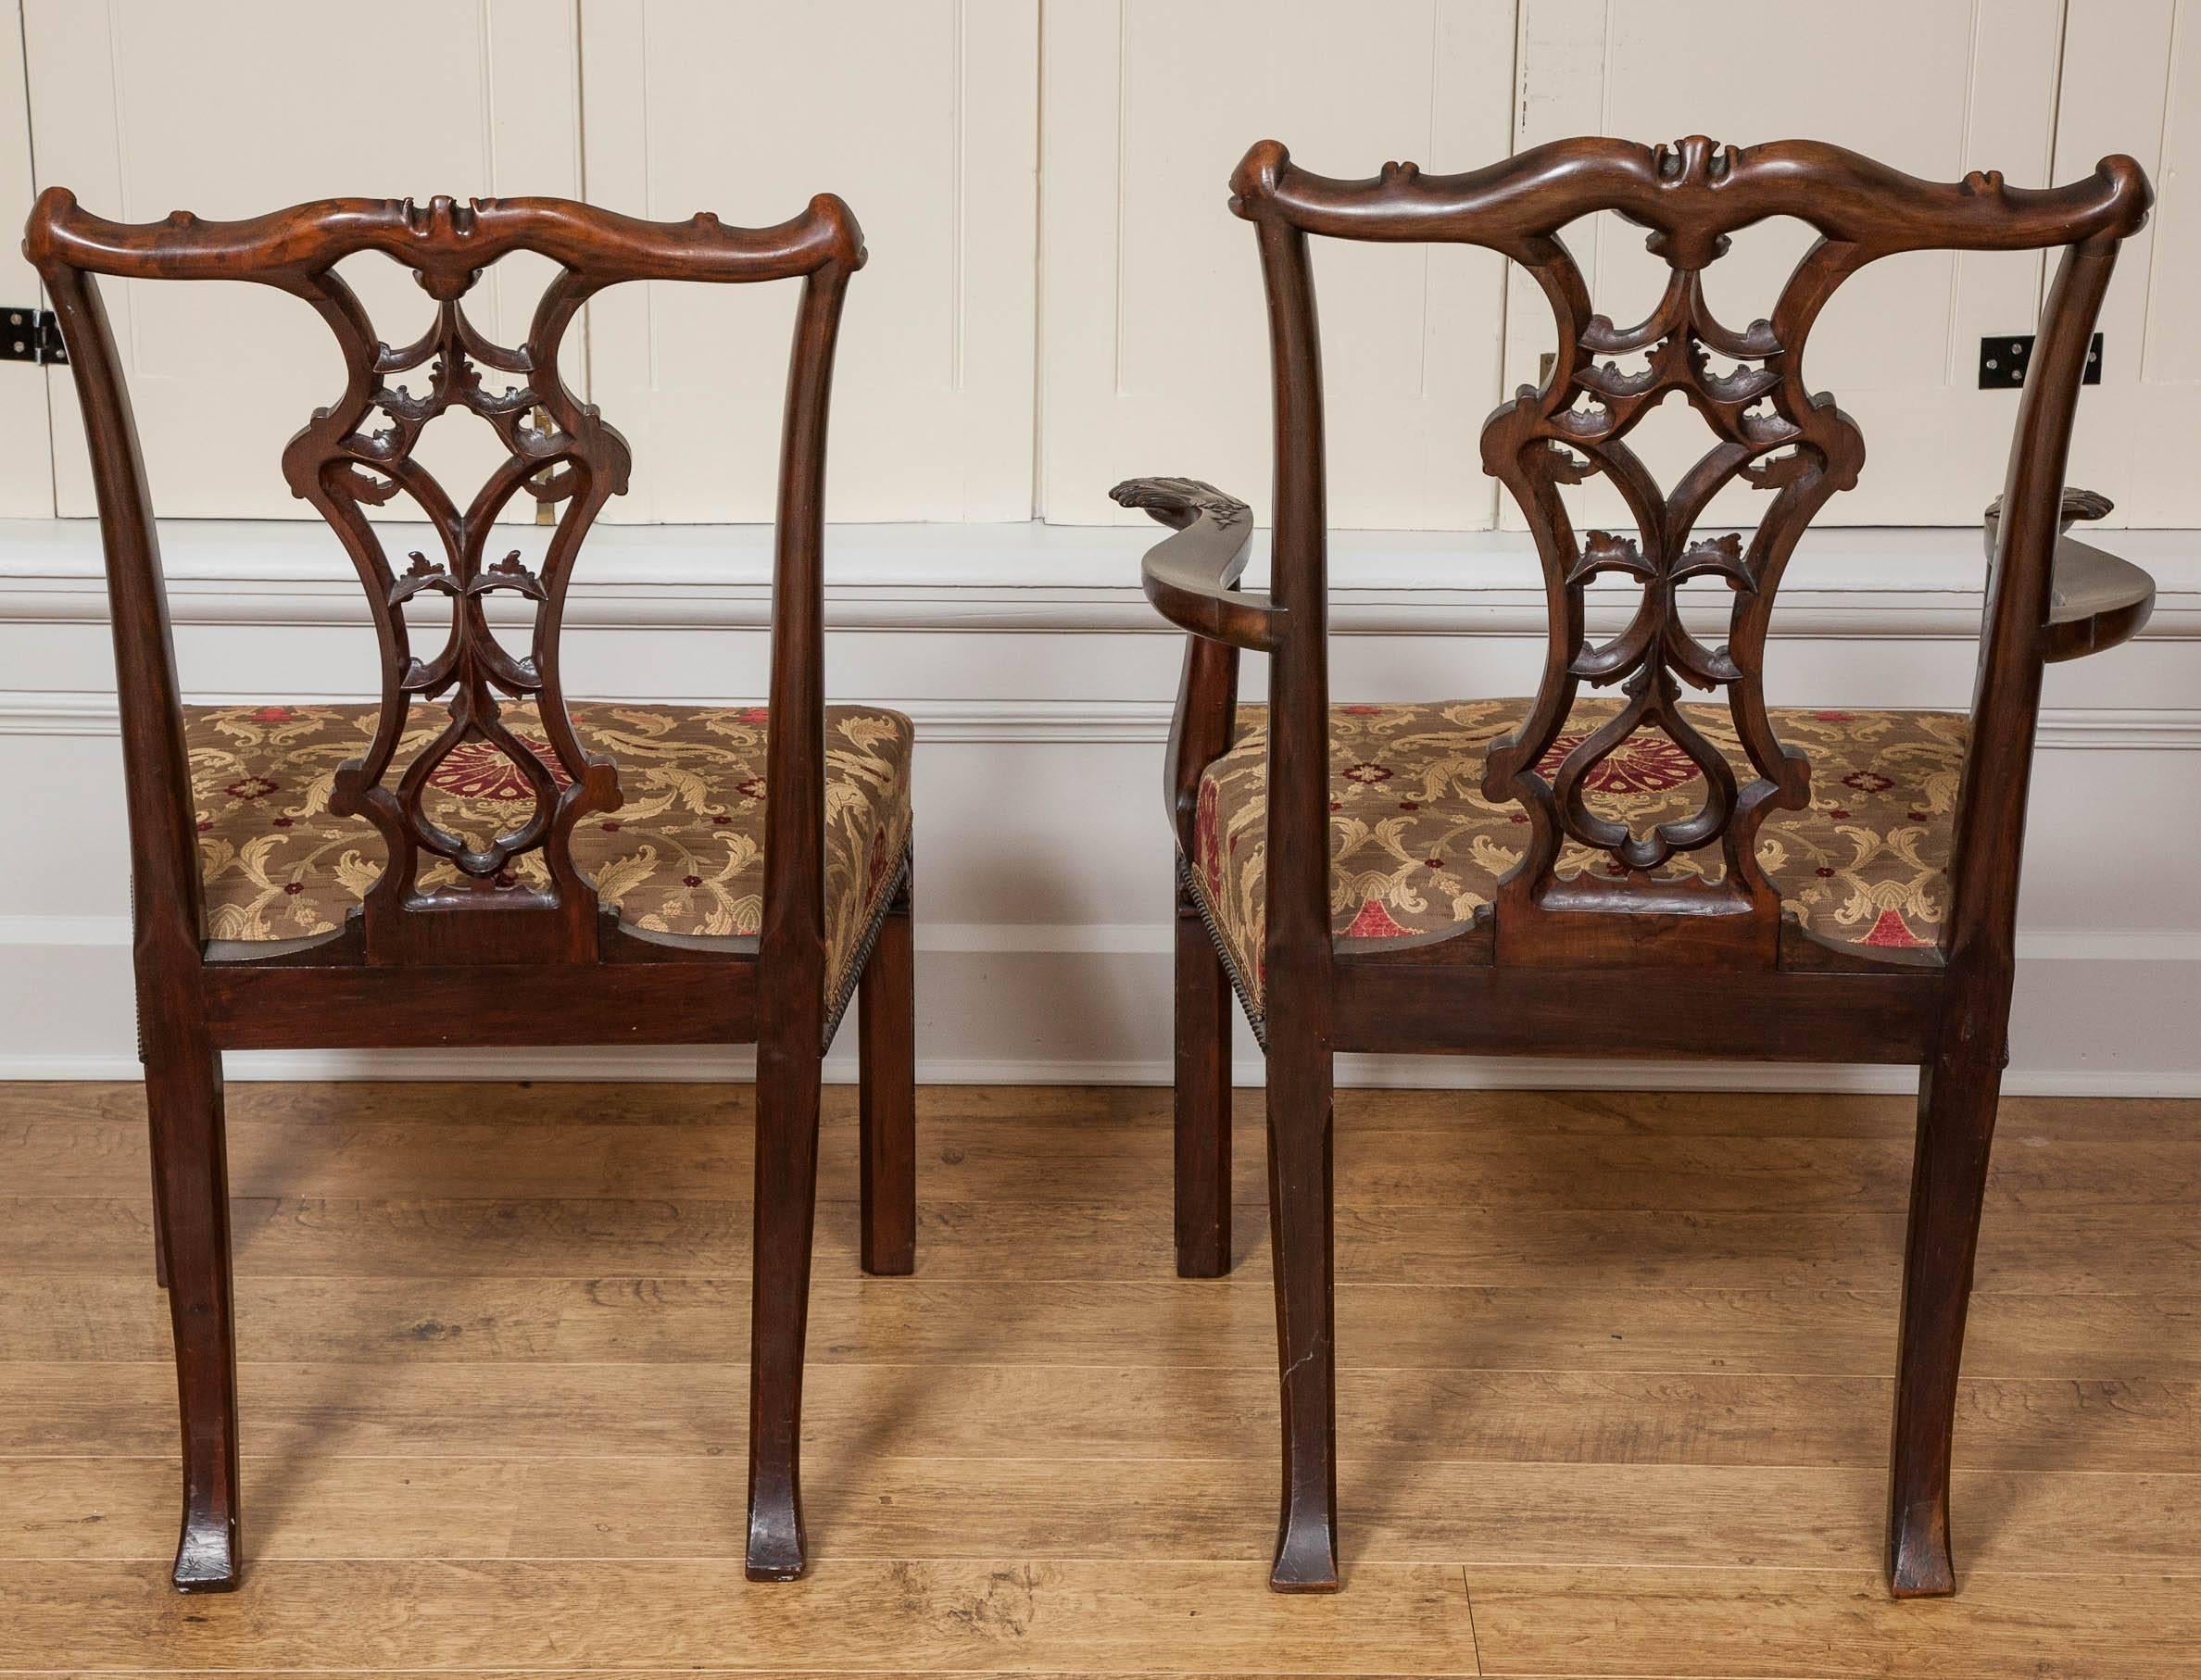 Carved Chippendale style carved Mahogany Dining Chairs, 19th Century, Set of Ten (8+2) For Sale